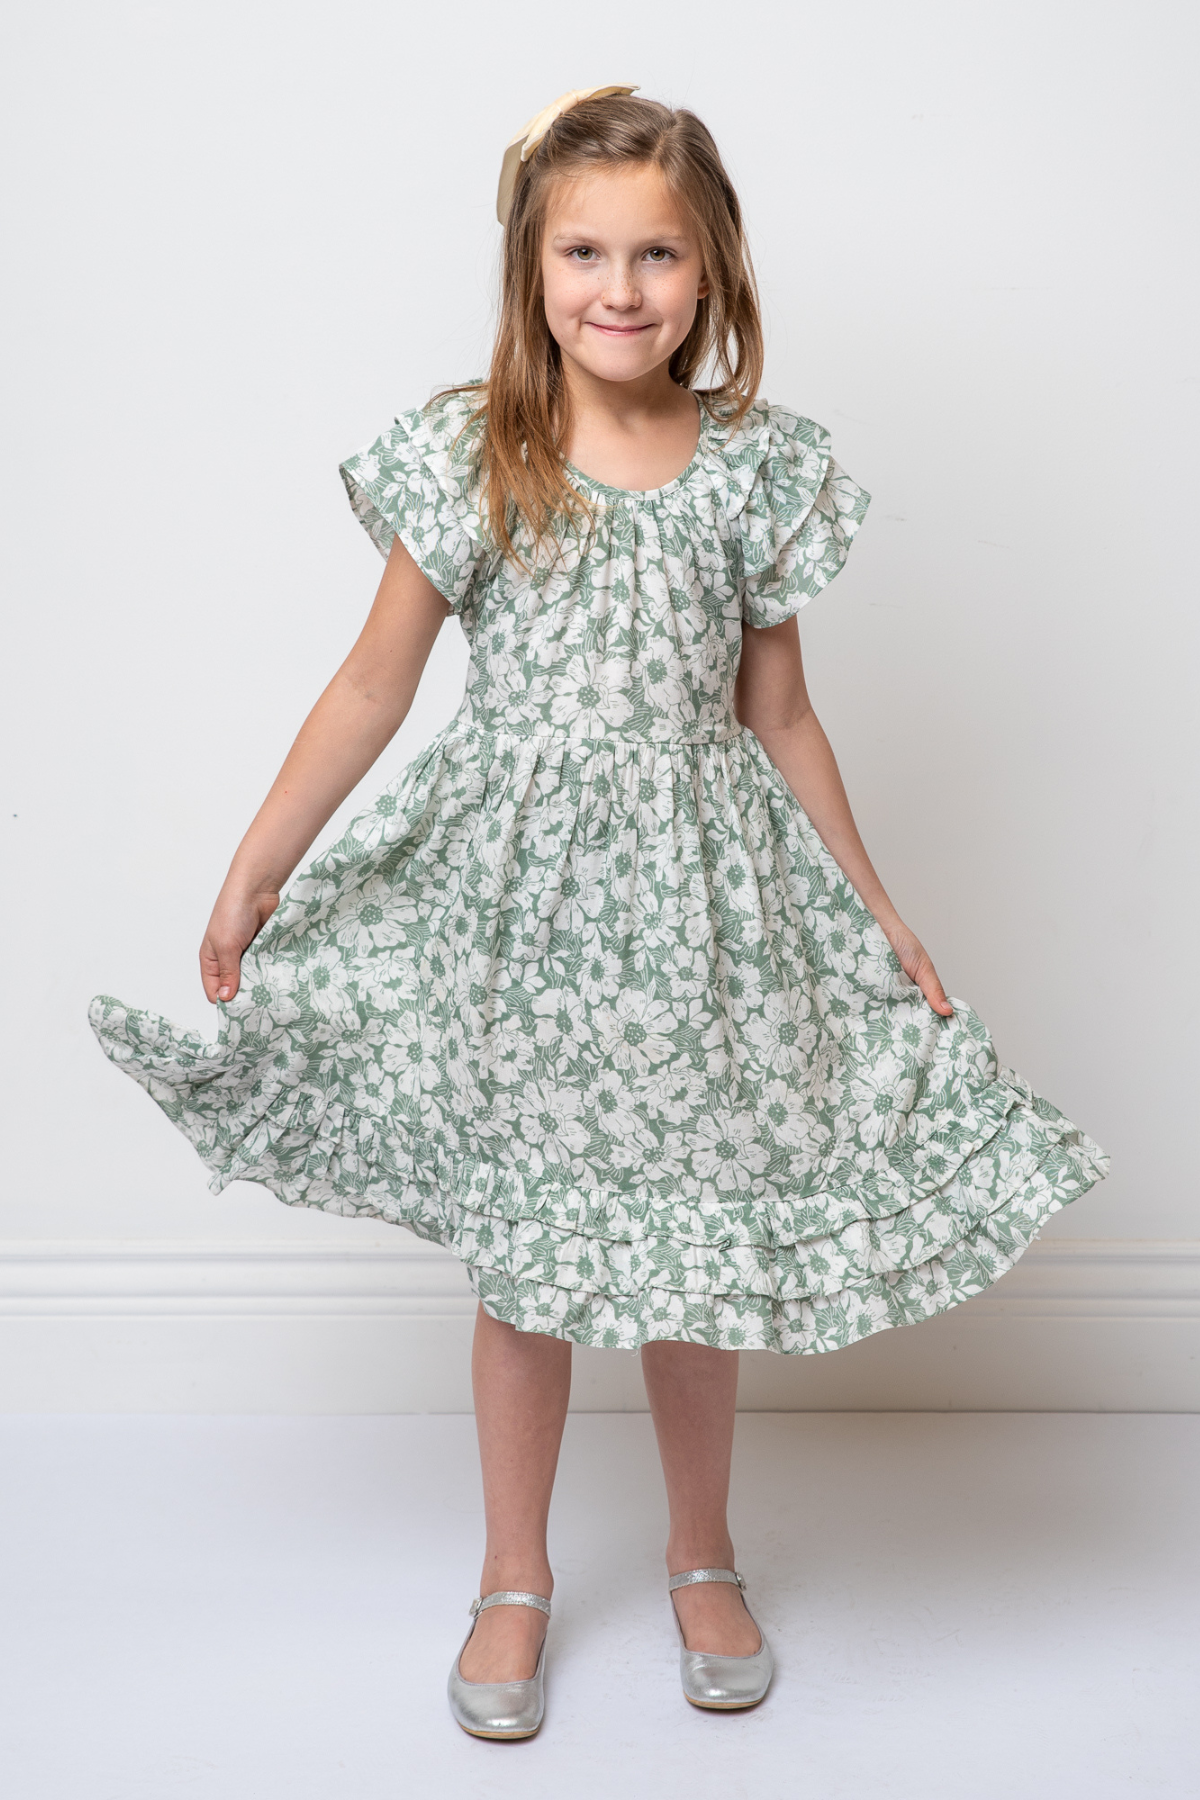 The Clara Dress in Green Floral